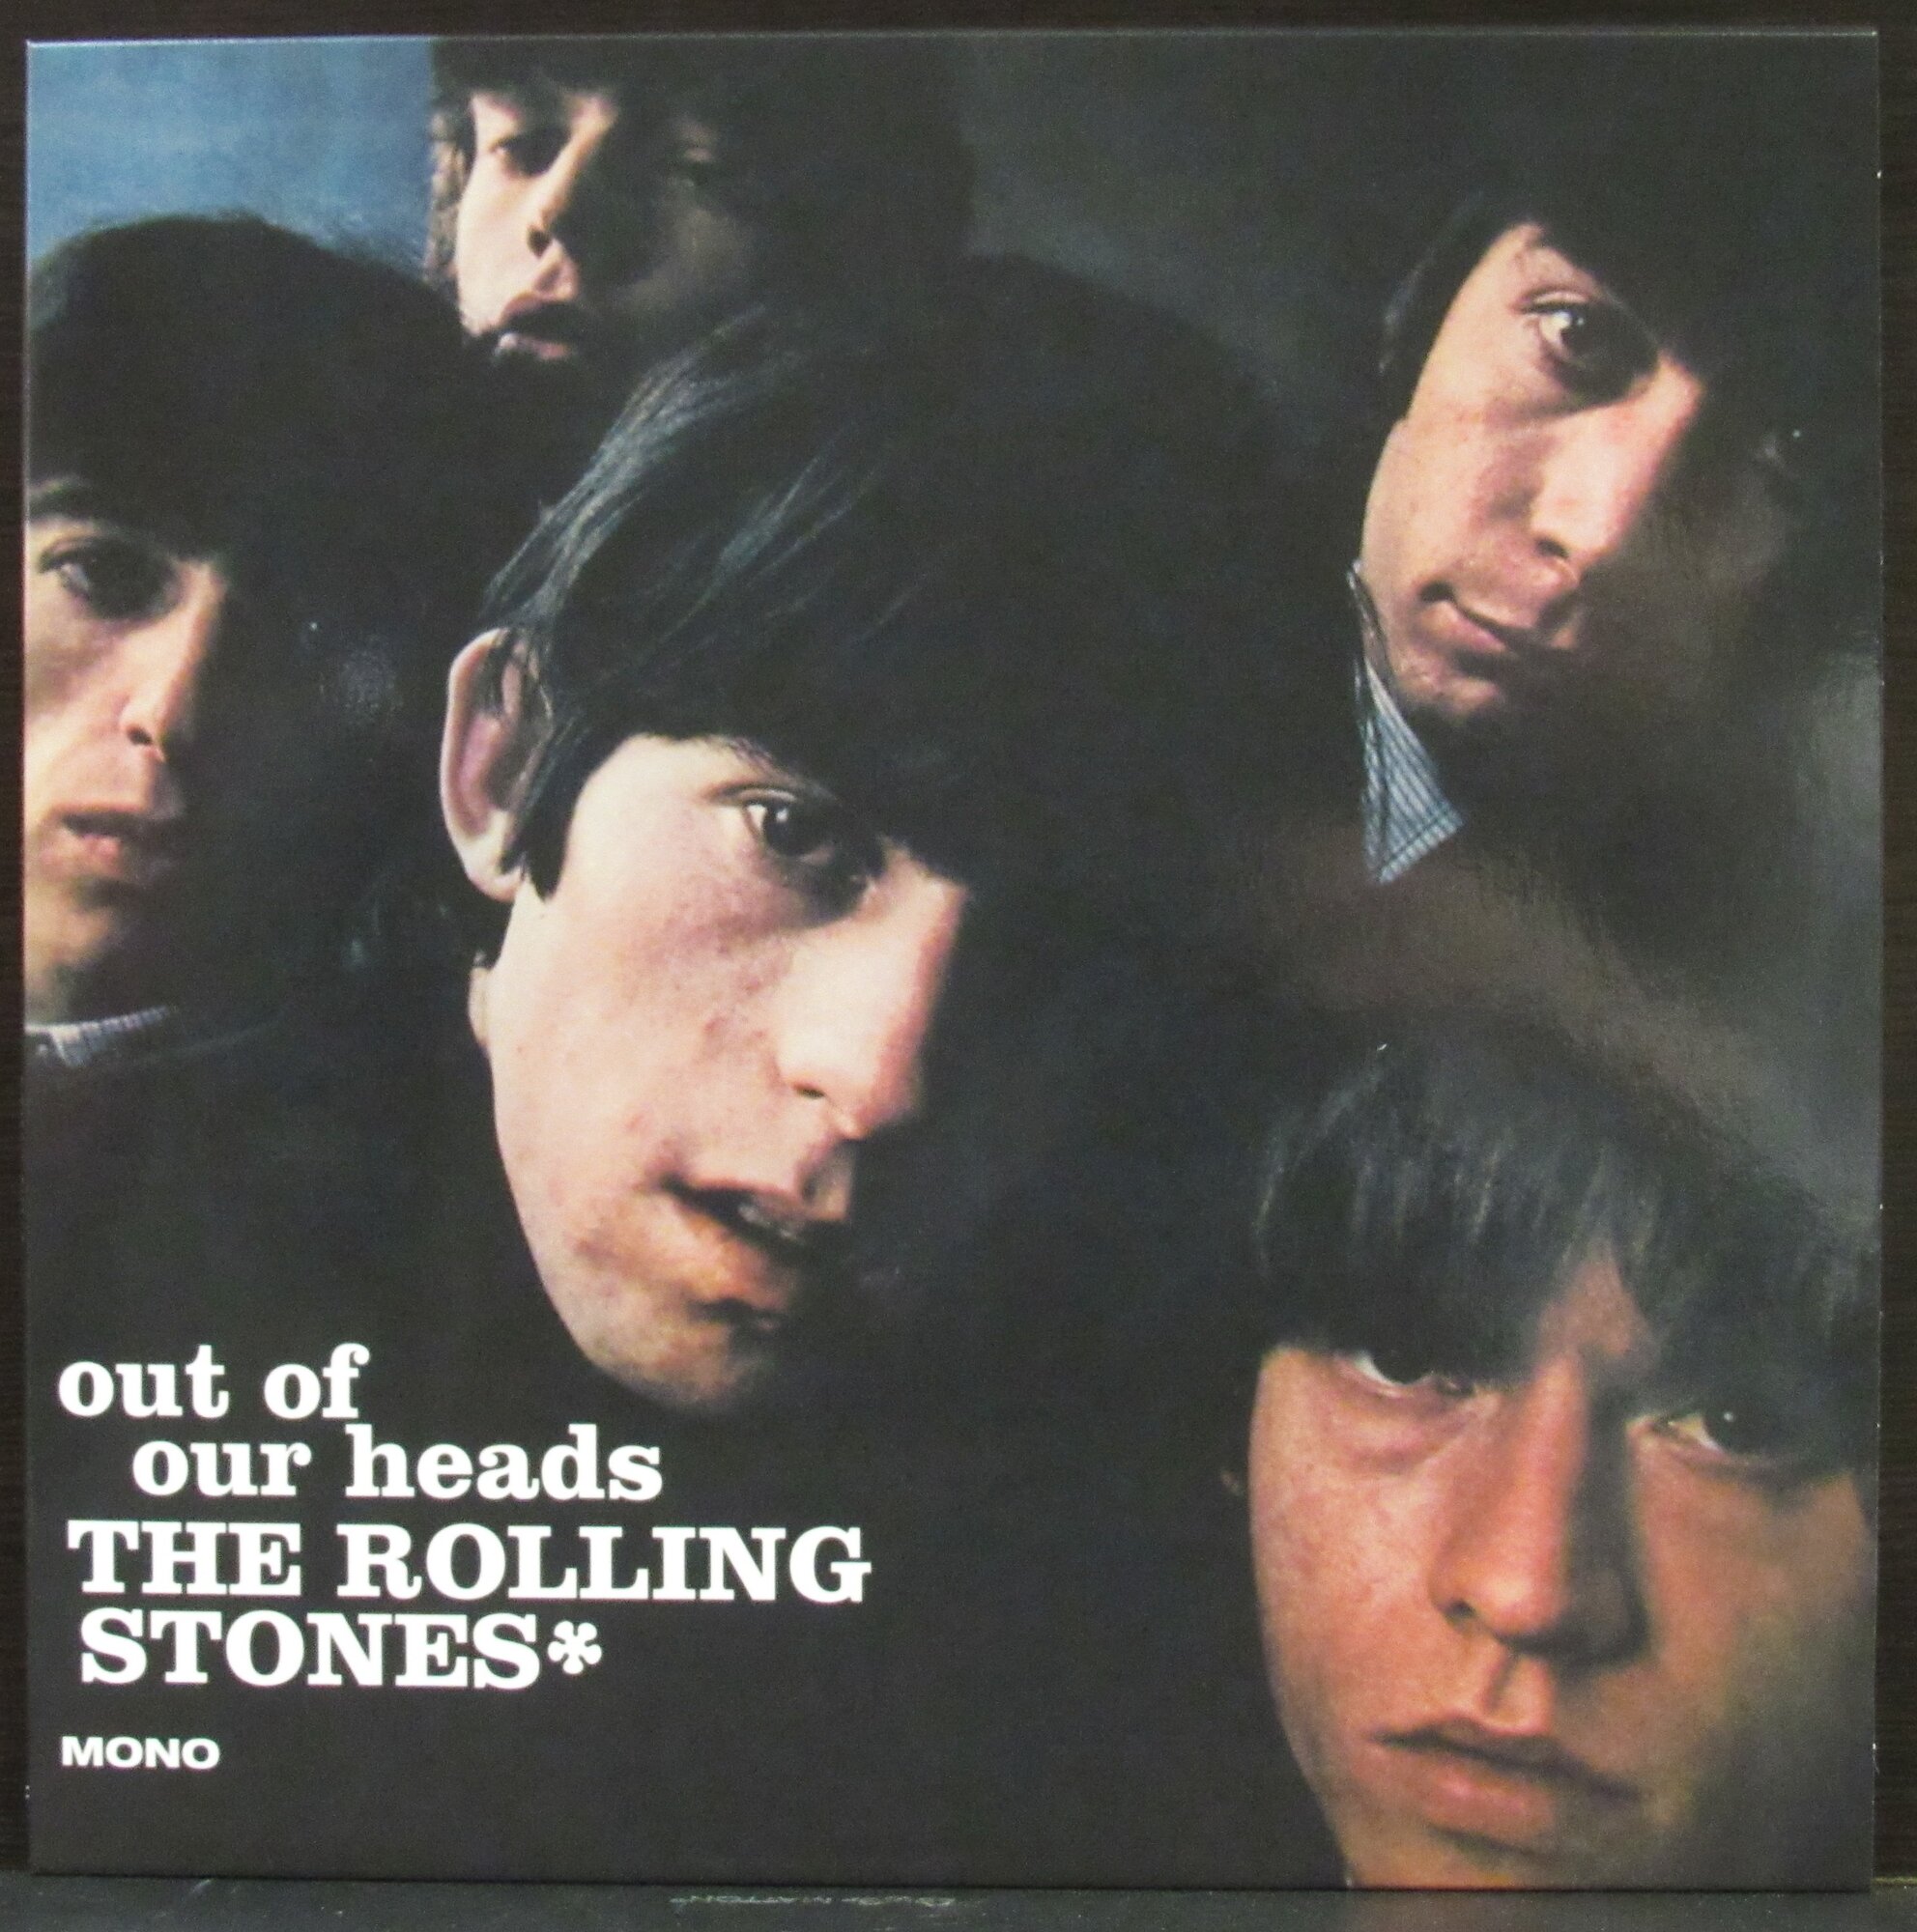 Rolling Stones "Виниловая пластинка Rolling Stones Out Of Our Heads (Usa) - Mono"